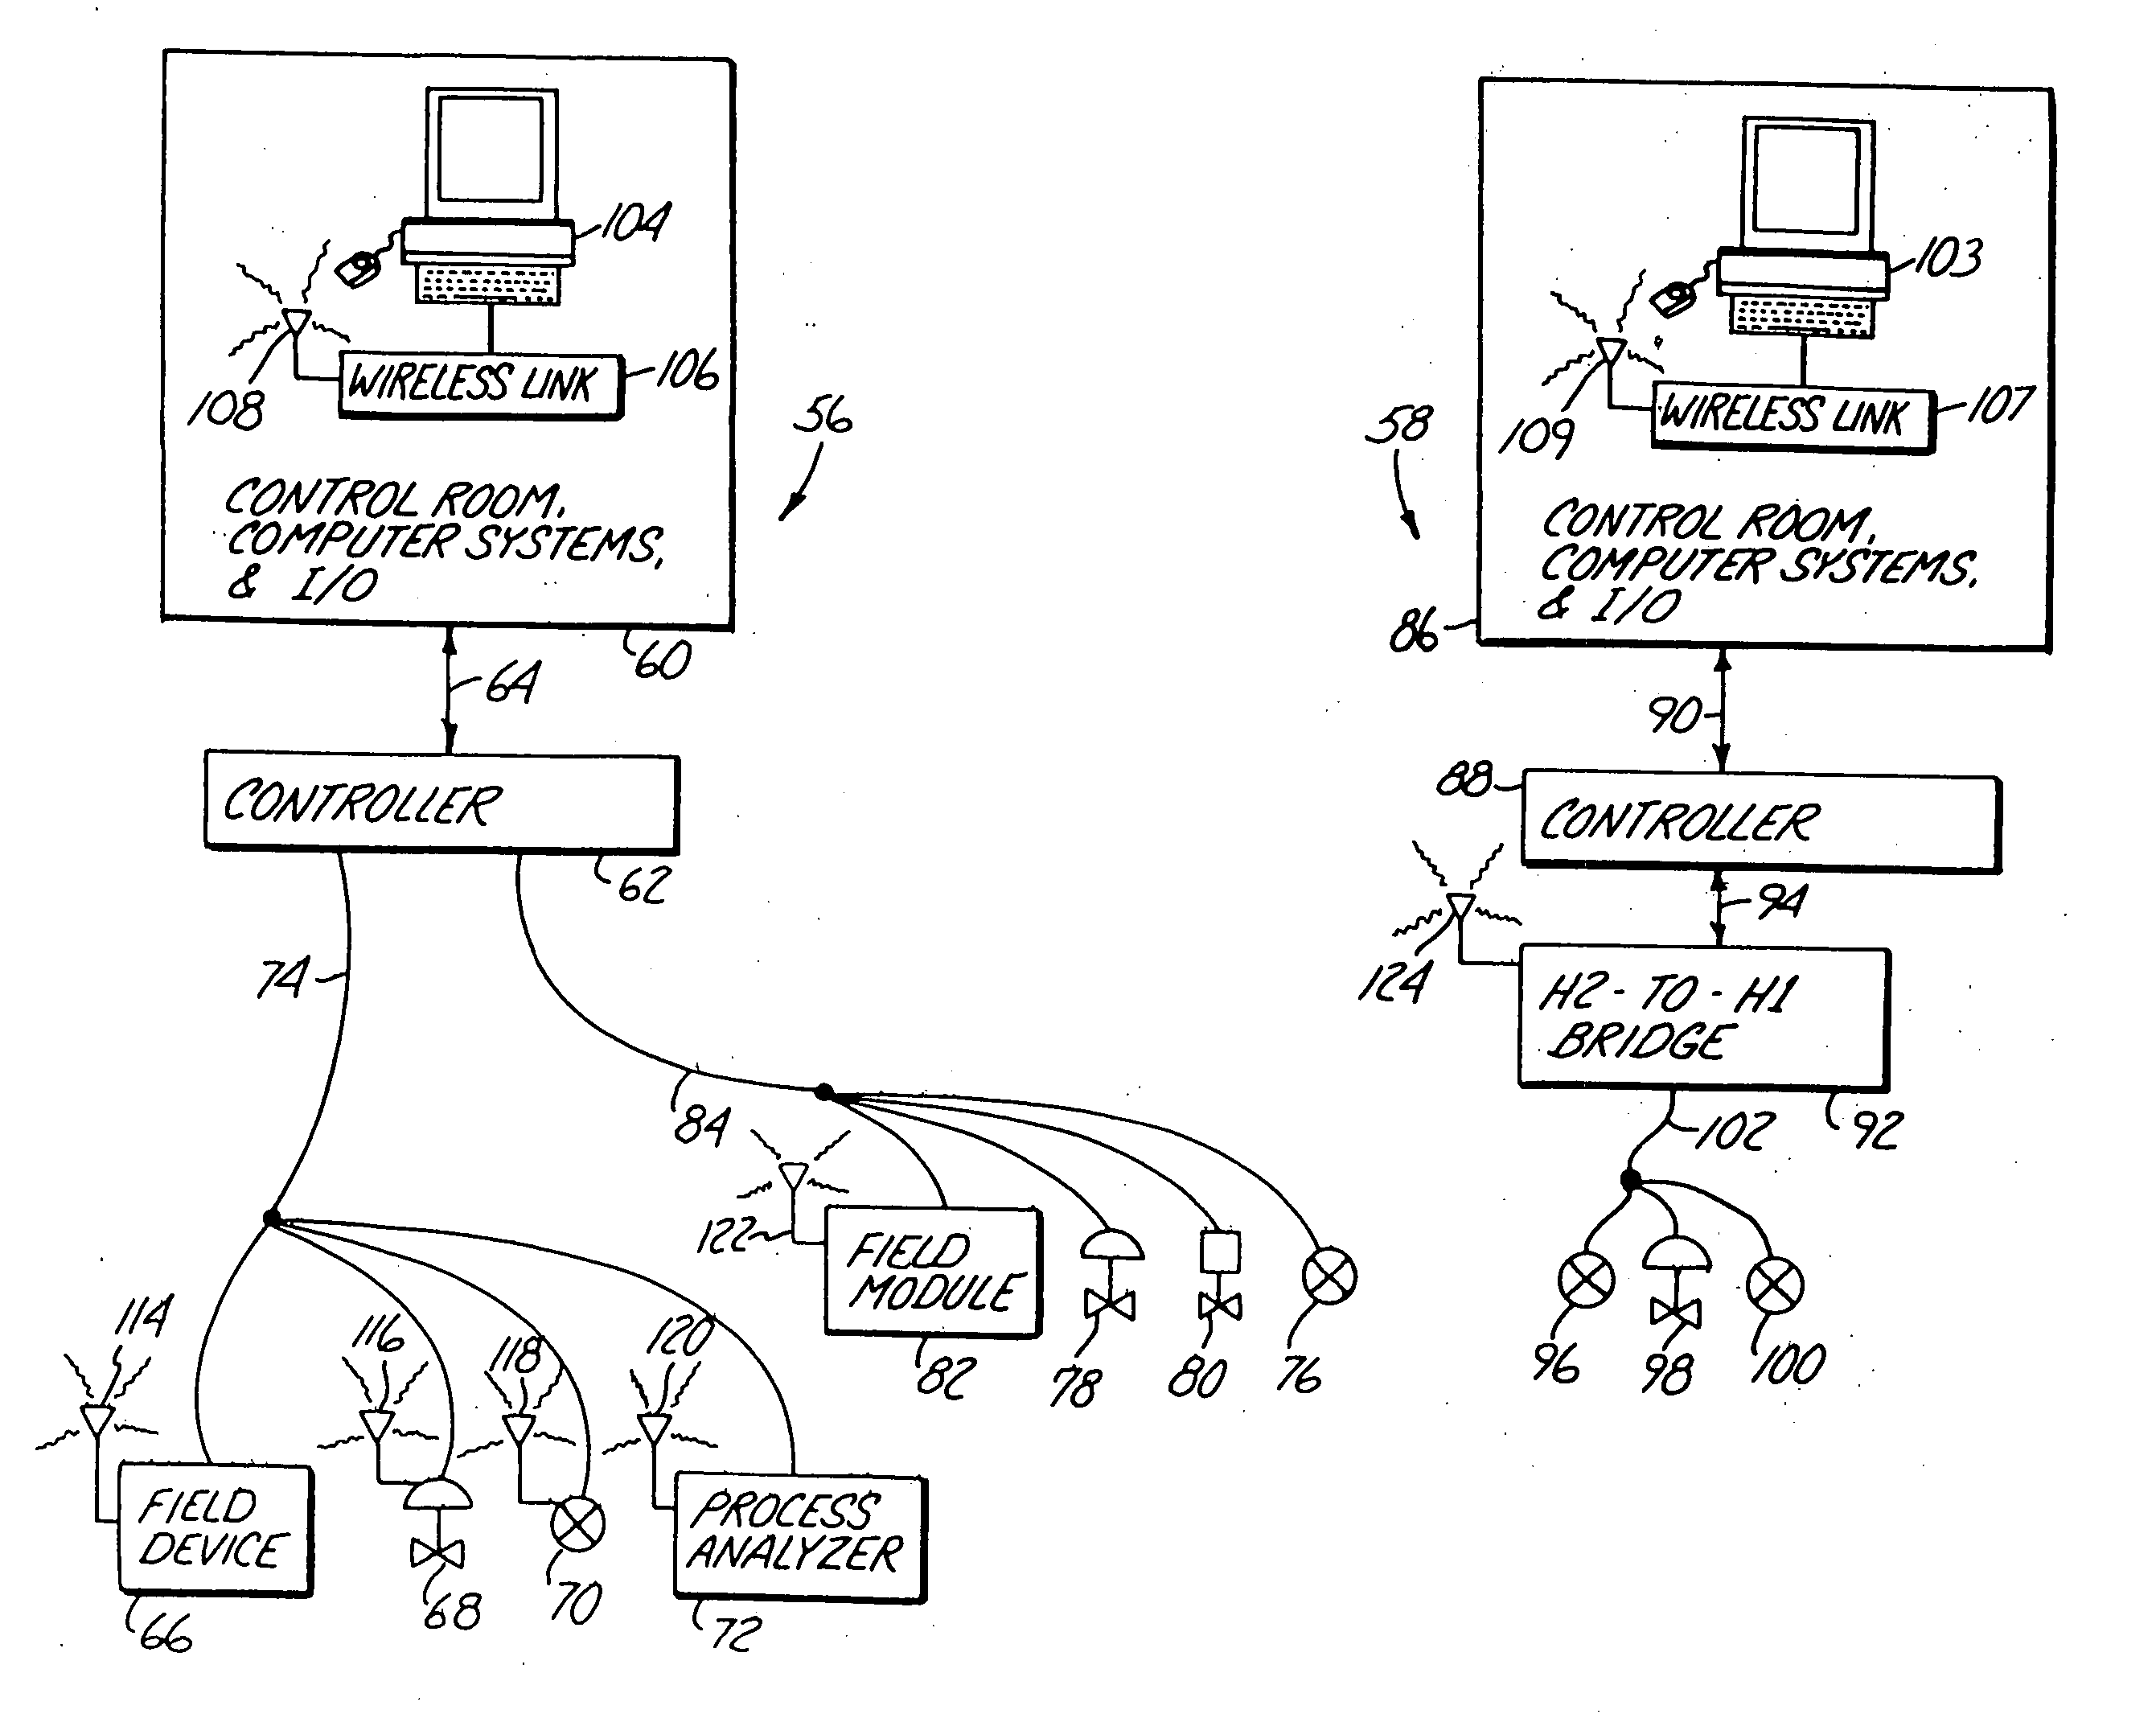 Wireless communications within a process control system using a bus protocol